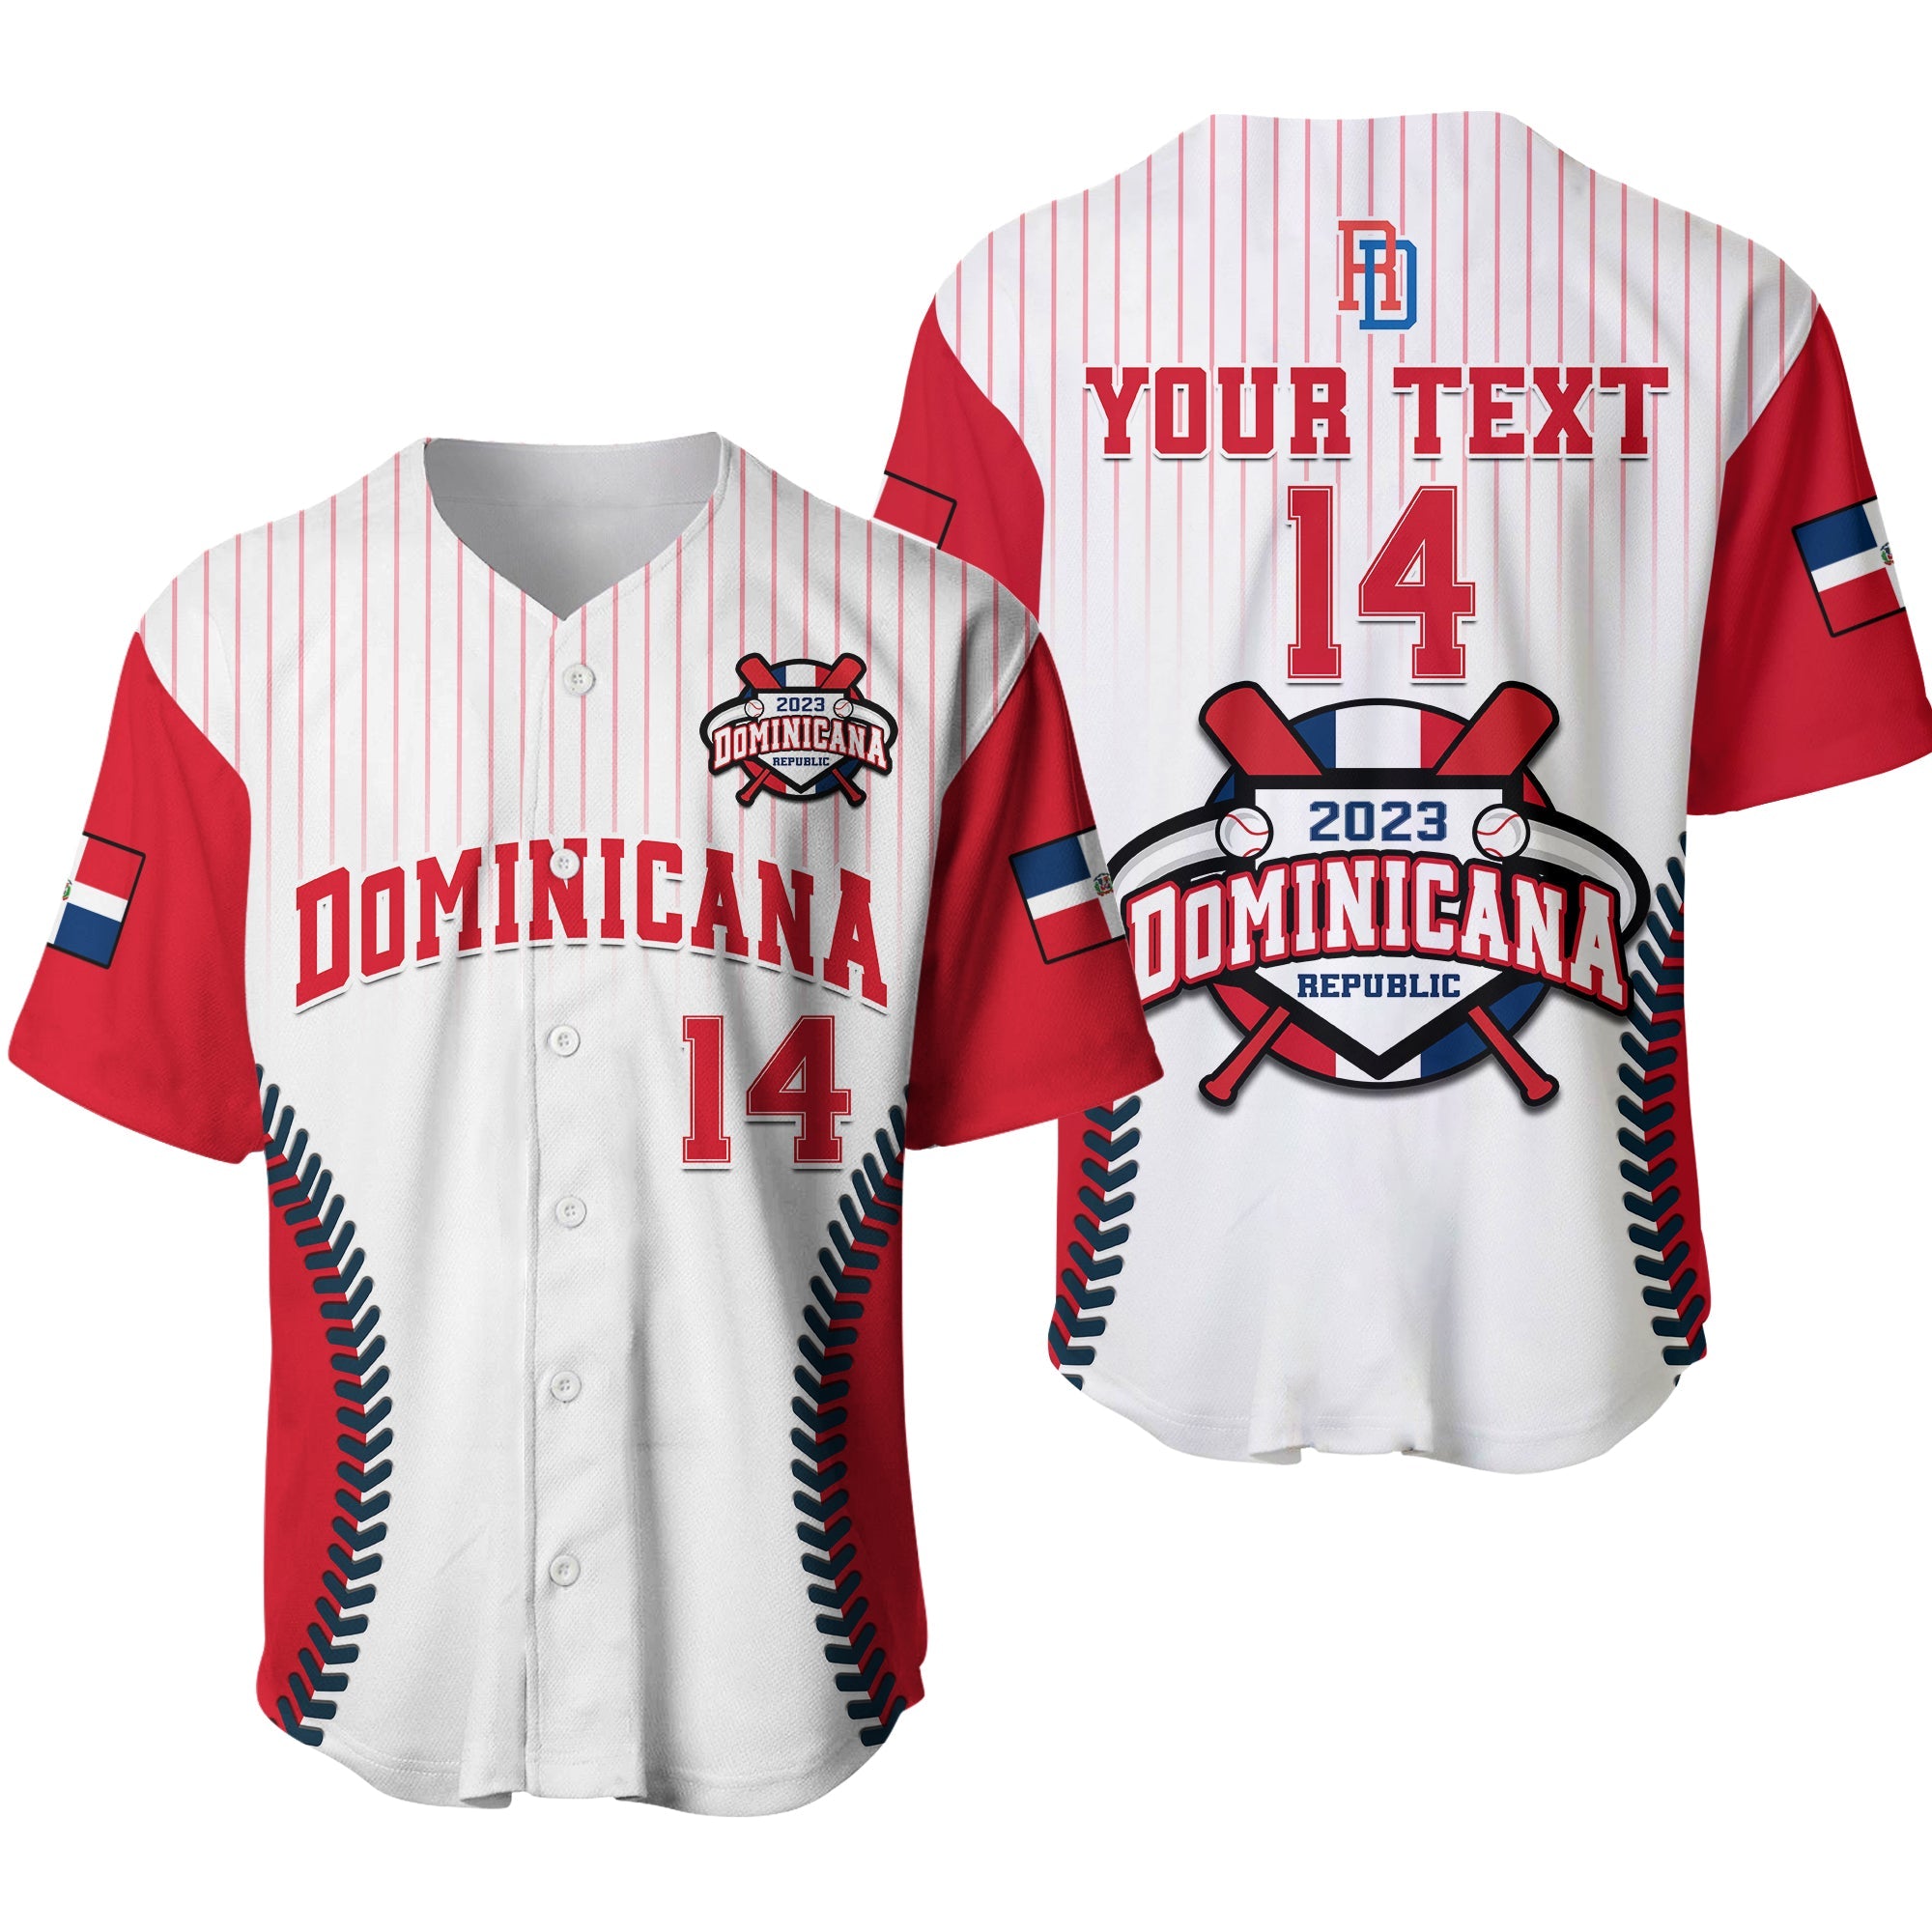 custom-text-and-number-dominican-republic-baseball-2023-baseball-jersey-version-white-ver01